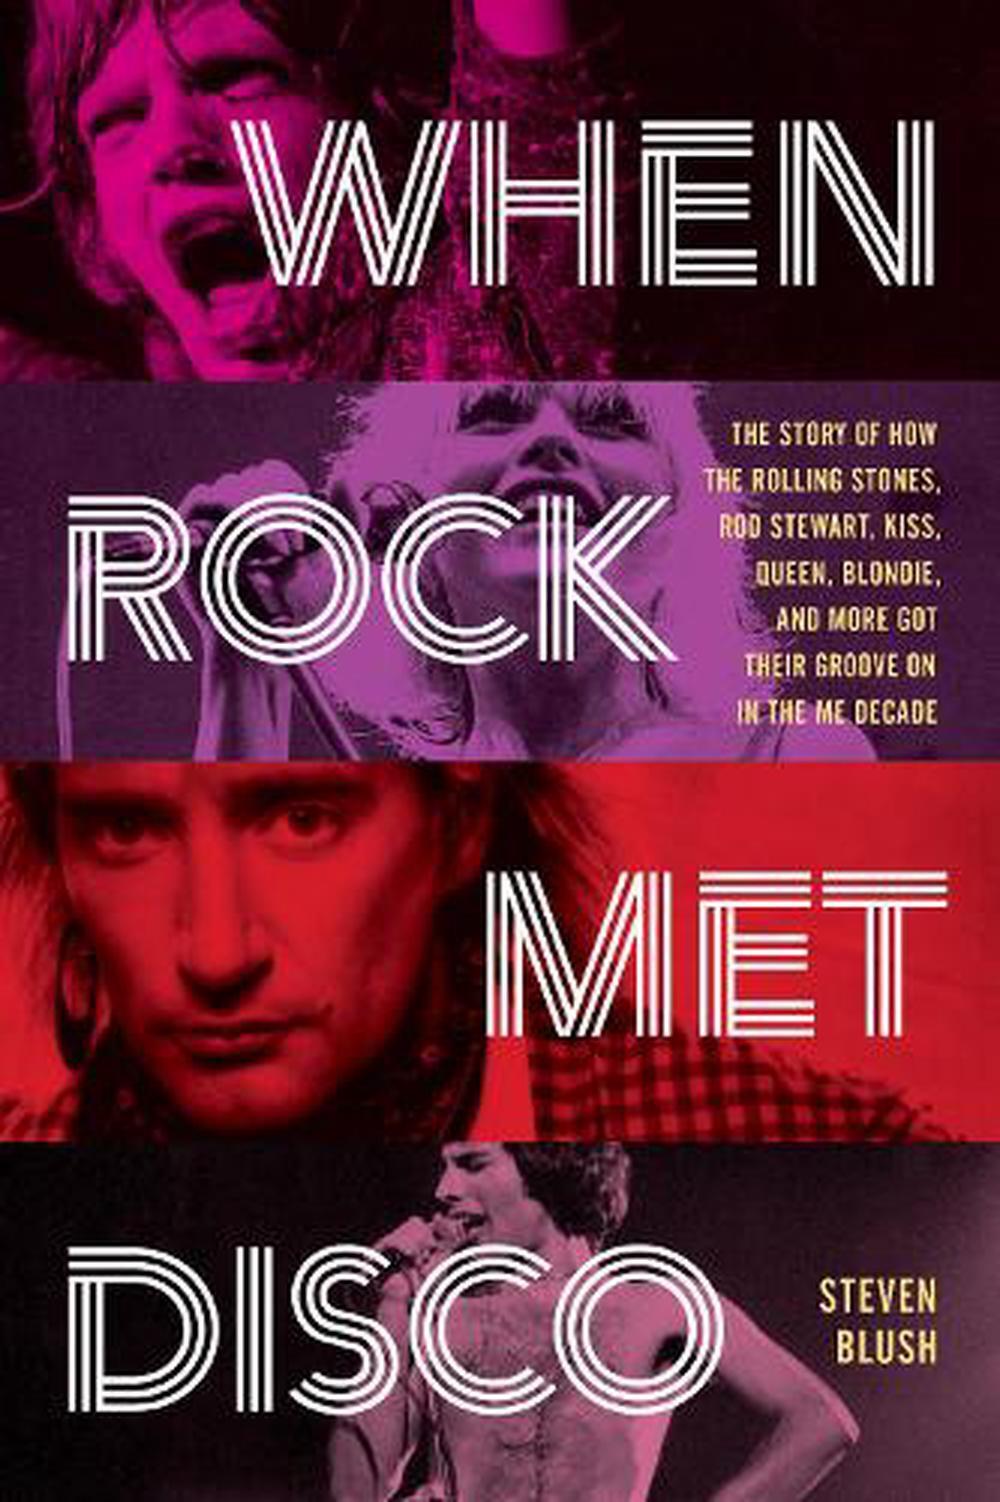 WHEN ROCK MET DISCO: THE STORY OF HOW THE ROLLING STONES, ROD STEWART, KISS, QUEEN, BLONDIE AND MORE GOT THEIR GROOVE ON IN THE ME DECADE - PAPERBACK - BOOK